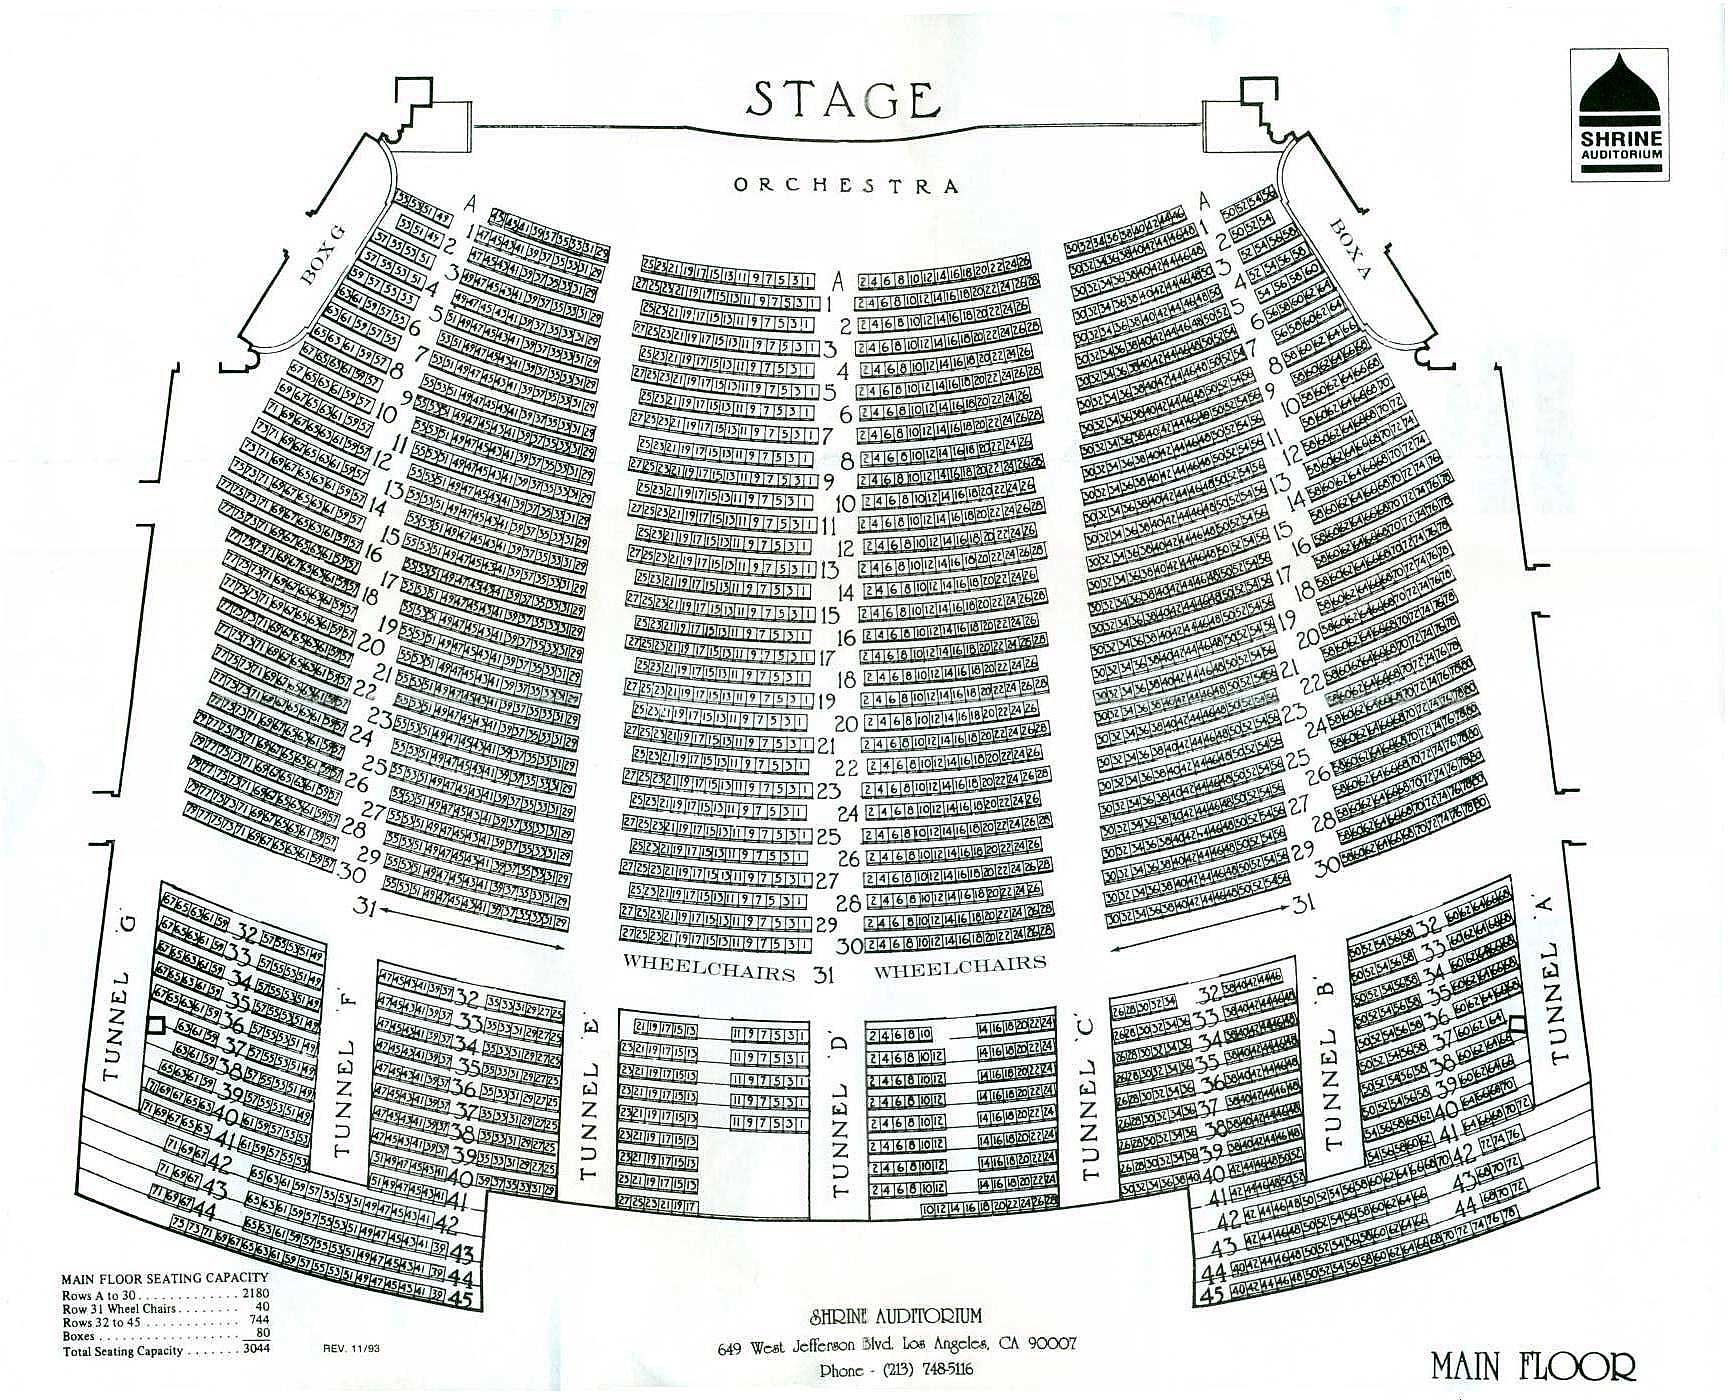 Seating at the Shrine Auditorium and Expo Hall, Los Angeles